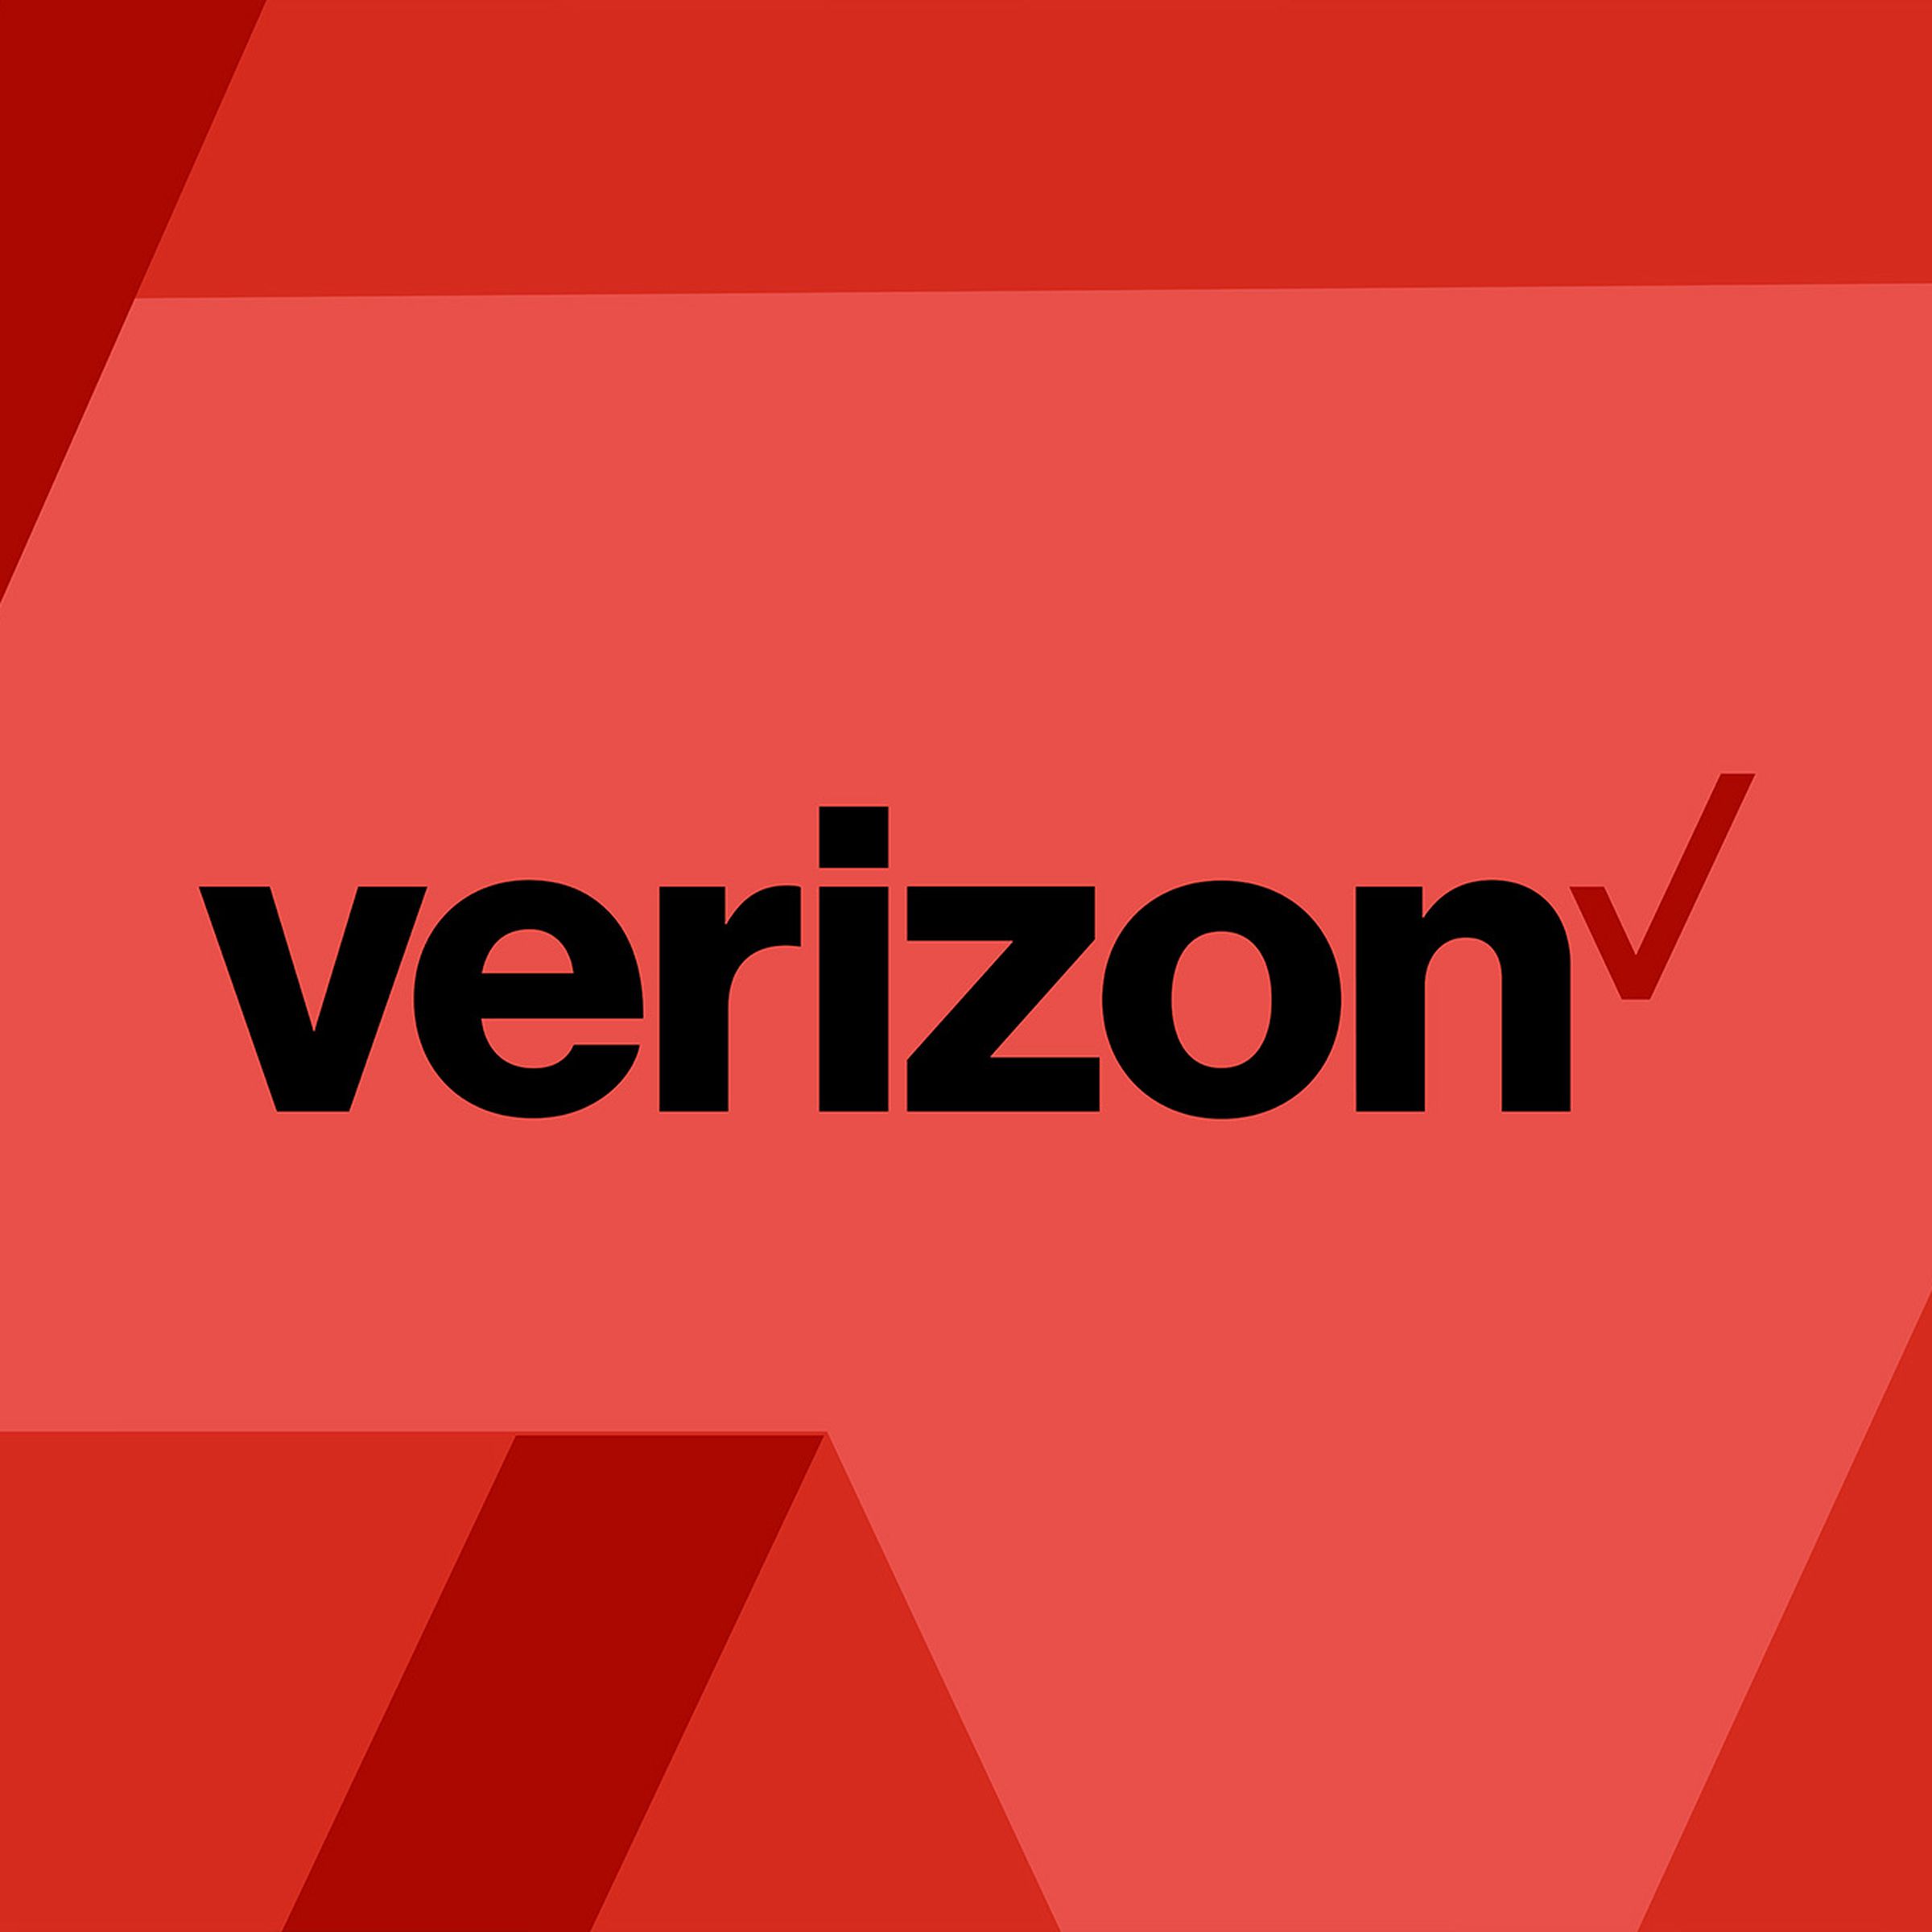 The Verizon logo against a red and black backdrop.